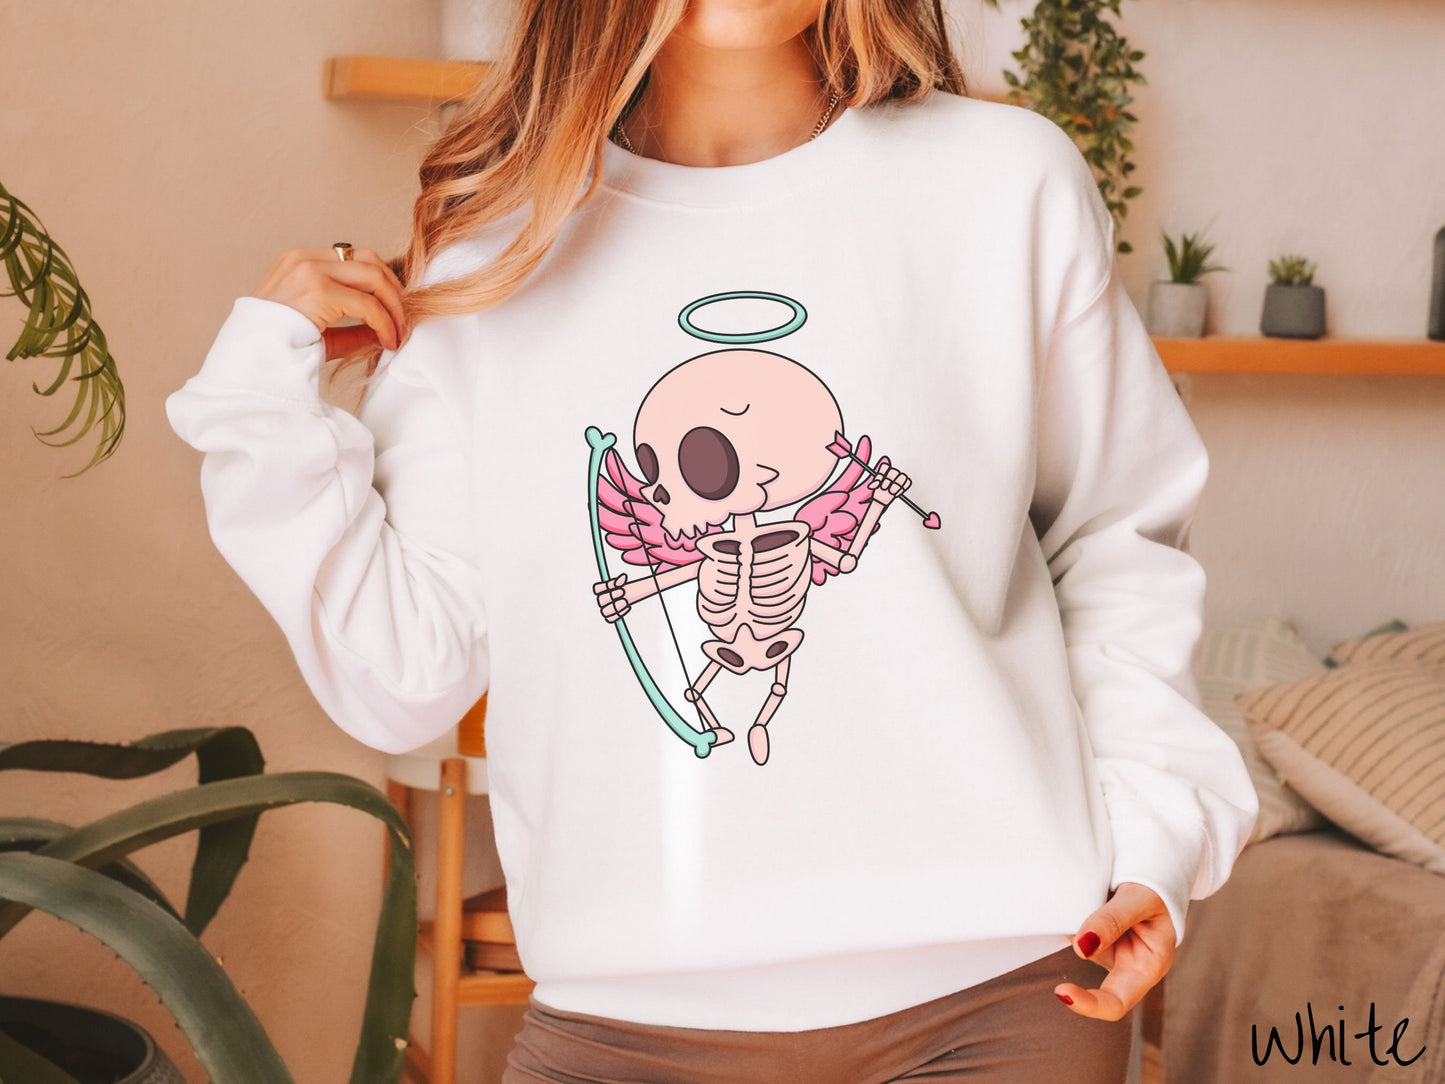 A woman wearing a cute white colored sweatshirt with a pink winged baby skeleton cupid with a halo holding a heart-tipped arrow in its left hand and a bow in its right hand.